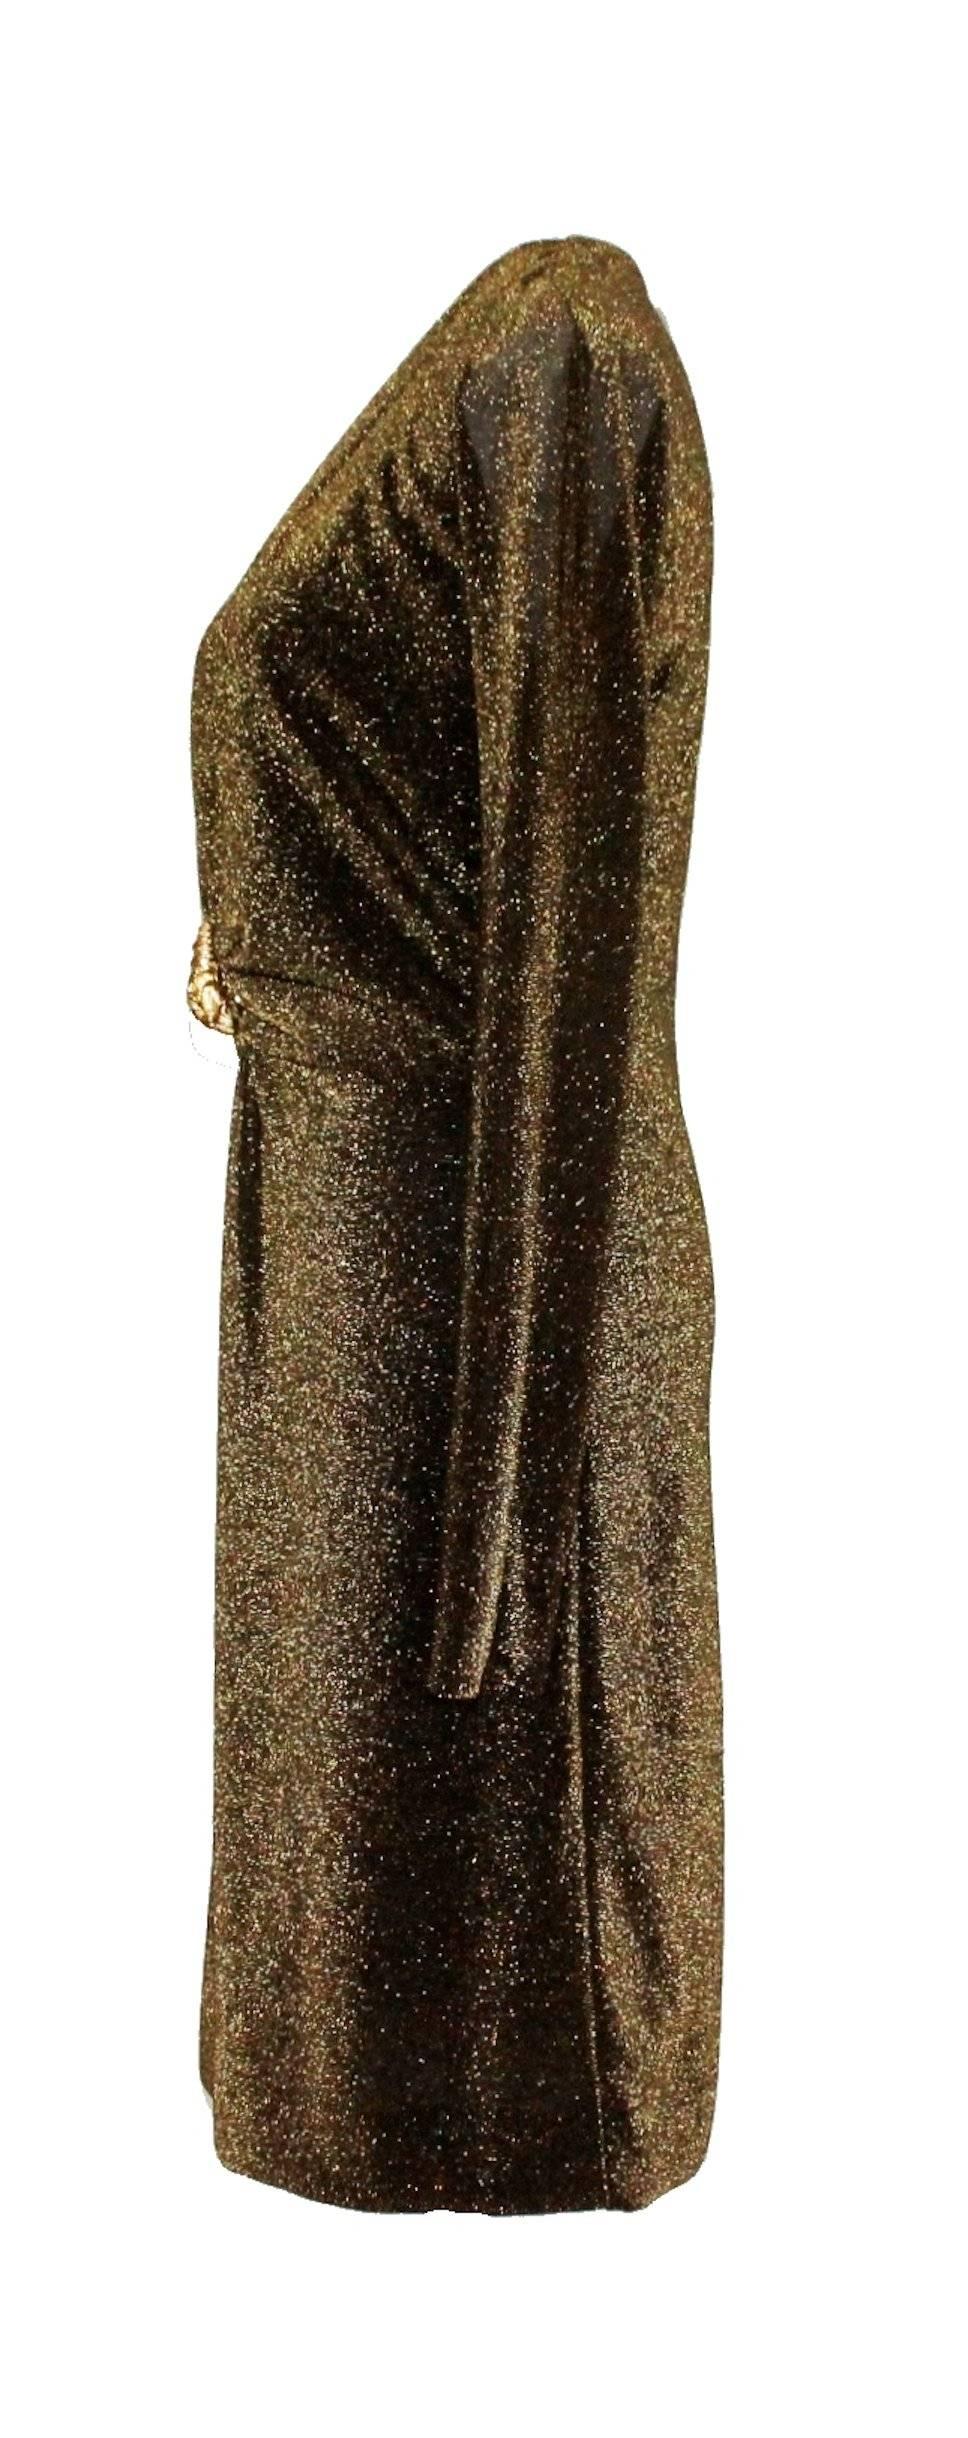 Stunning Dress by Tom Ford for Gucci
From his collection for Gucci in Fall/Winter 2000
Long sleeves
Deep Plunging Neckline
Gold-colored metal hardware lion brooch in front
Made in Italy
Dry Clean Only
Size 42
Brandnew with original tags still